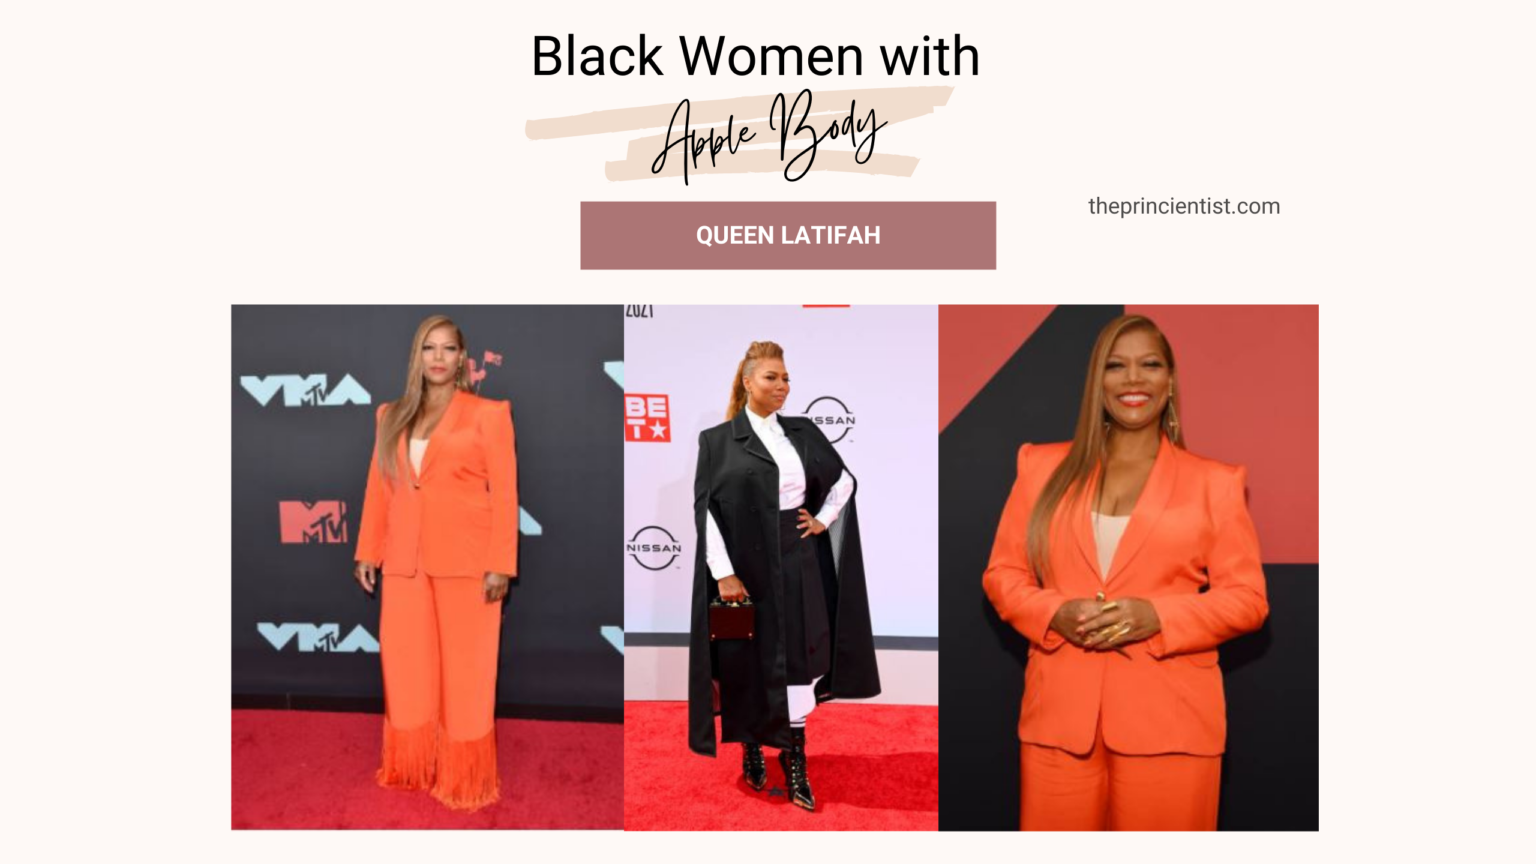 how to dress the apple shaped body - black woman apple body - queen latifah